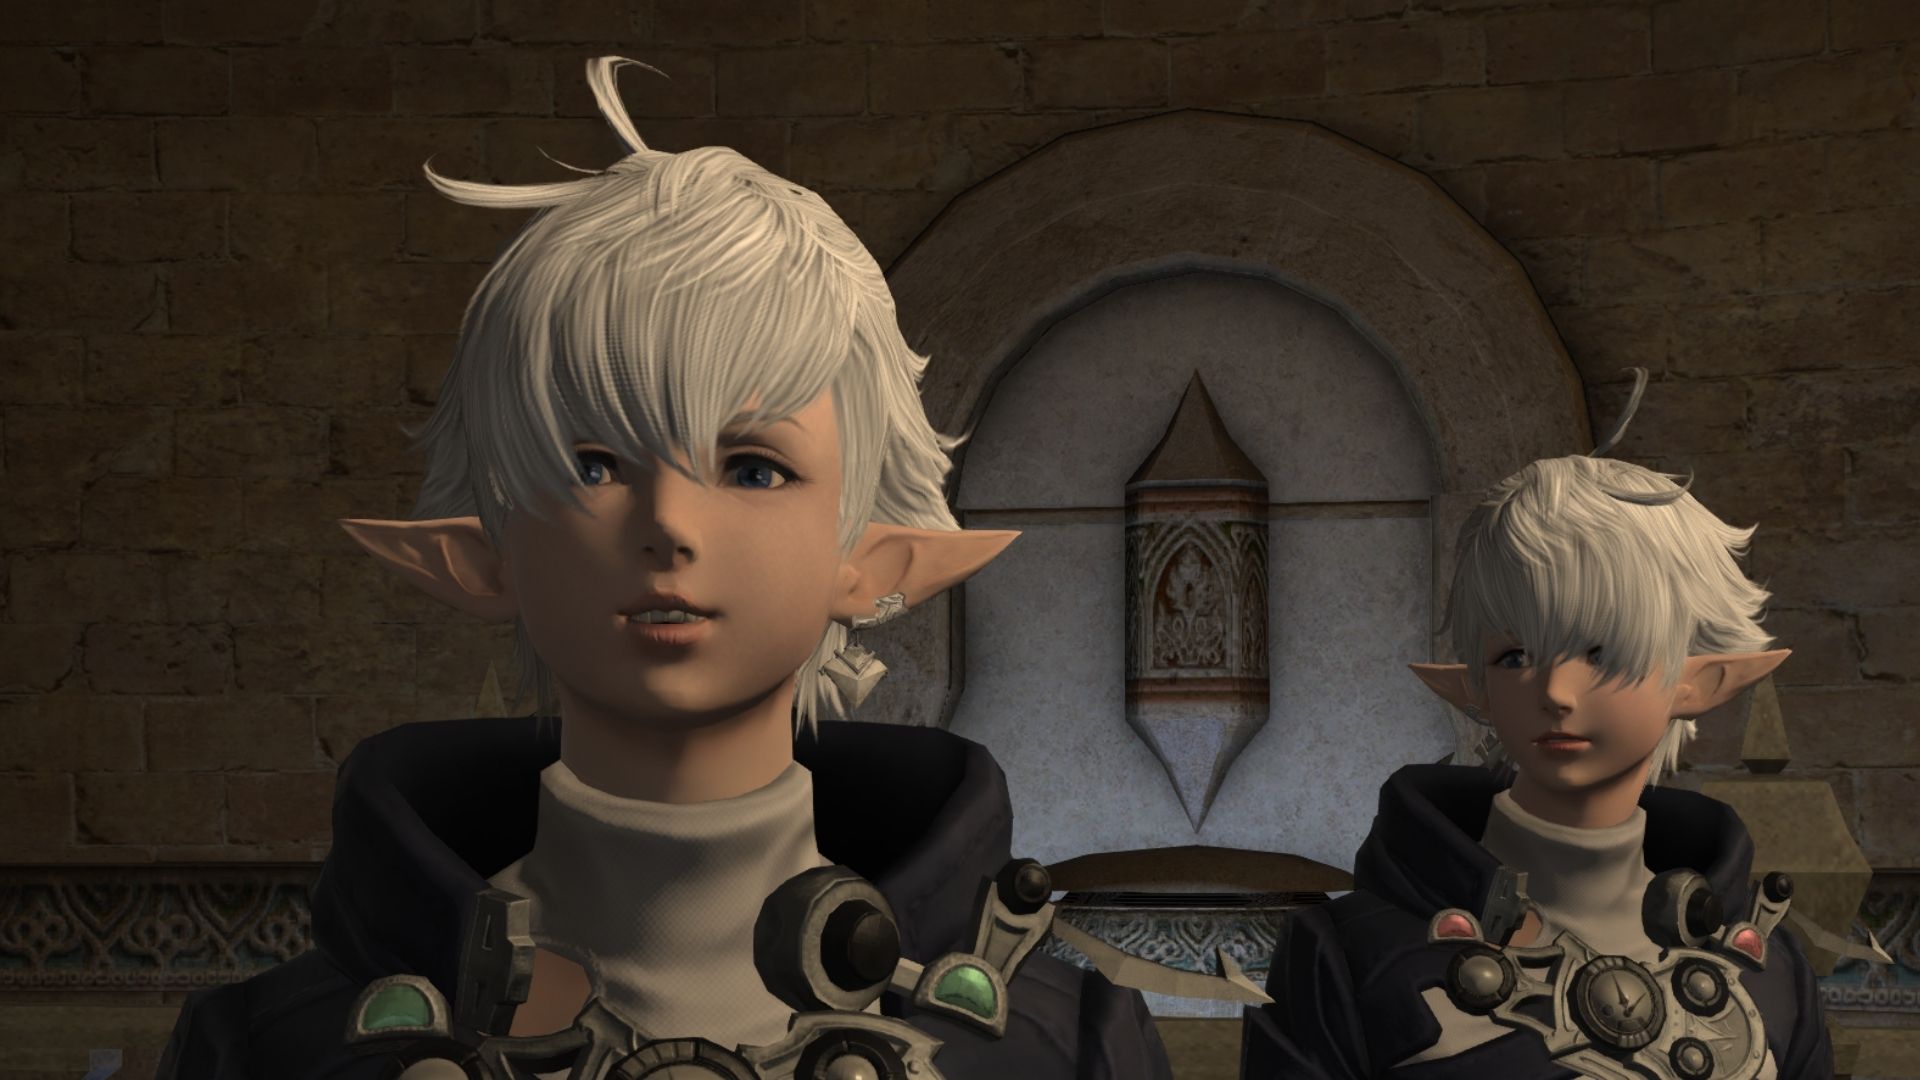 Minfilia let this child make his own army for funsies and it ended up destroying the whole organisation. Good job Alphinaud (Screenshot: Square Enix / Kotaku)